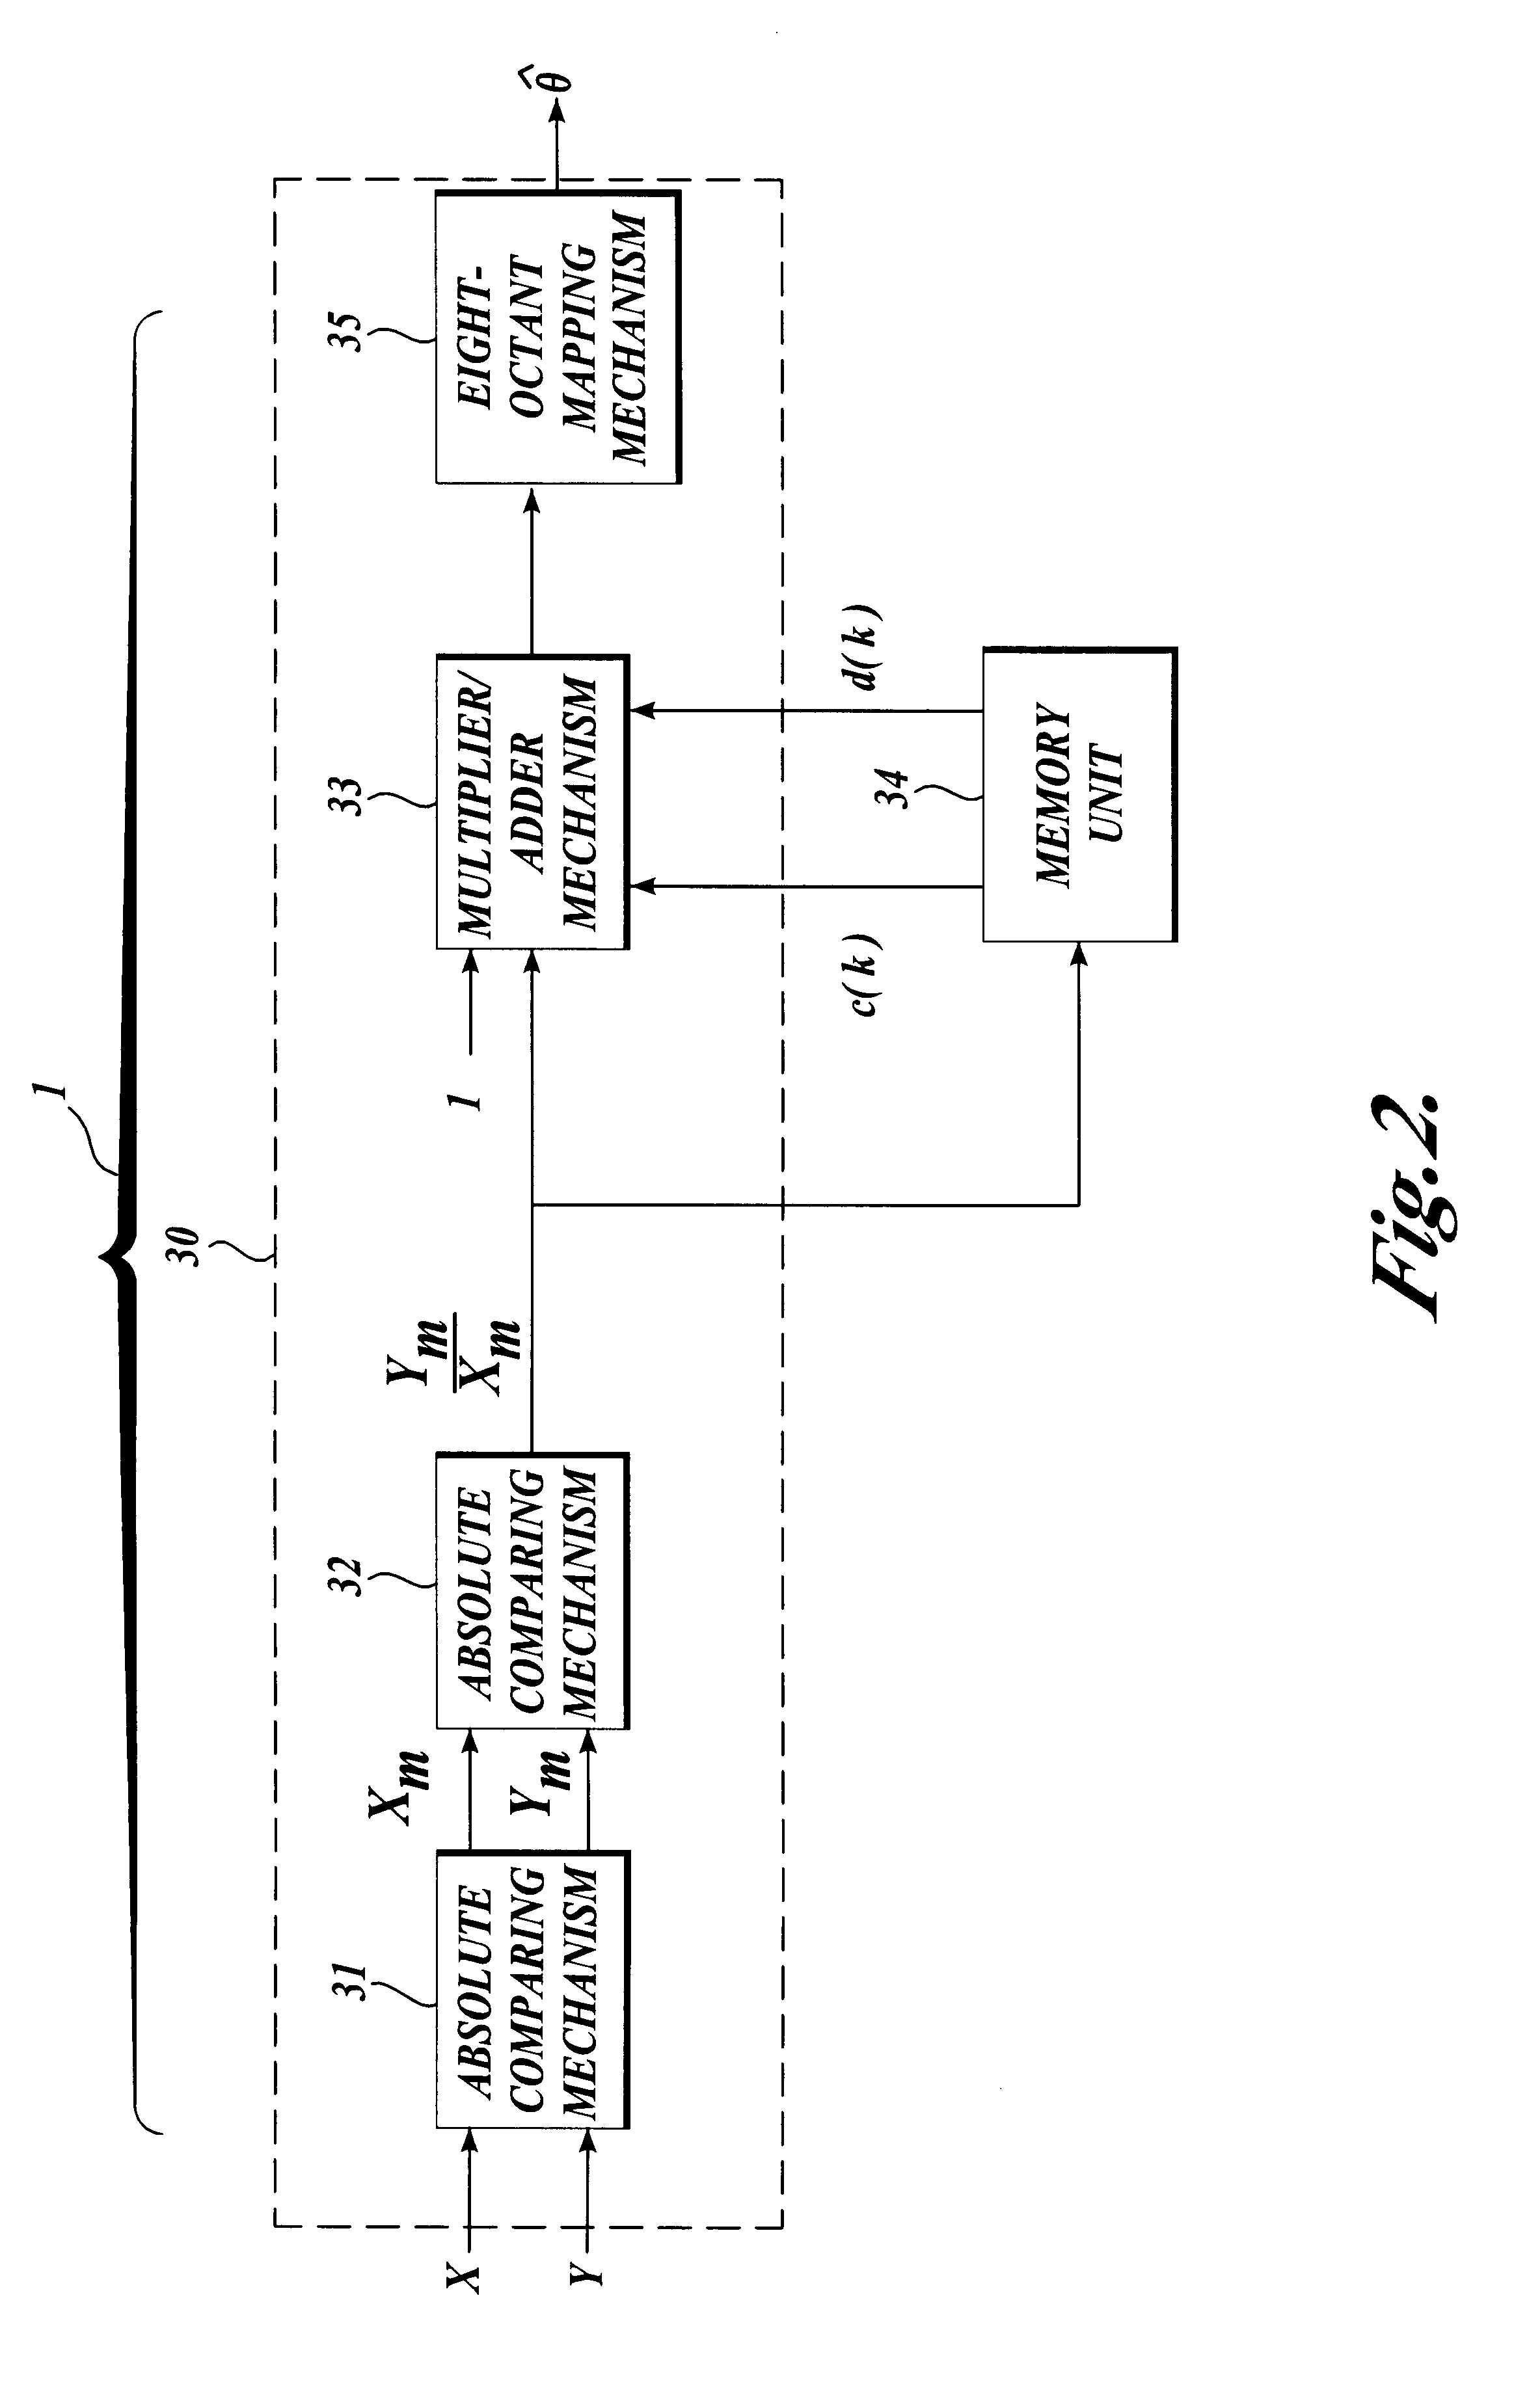 Apparatus and method for implementing an inverse arctangent function using piecewise linear theorem to simplify